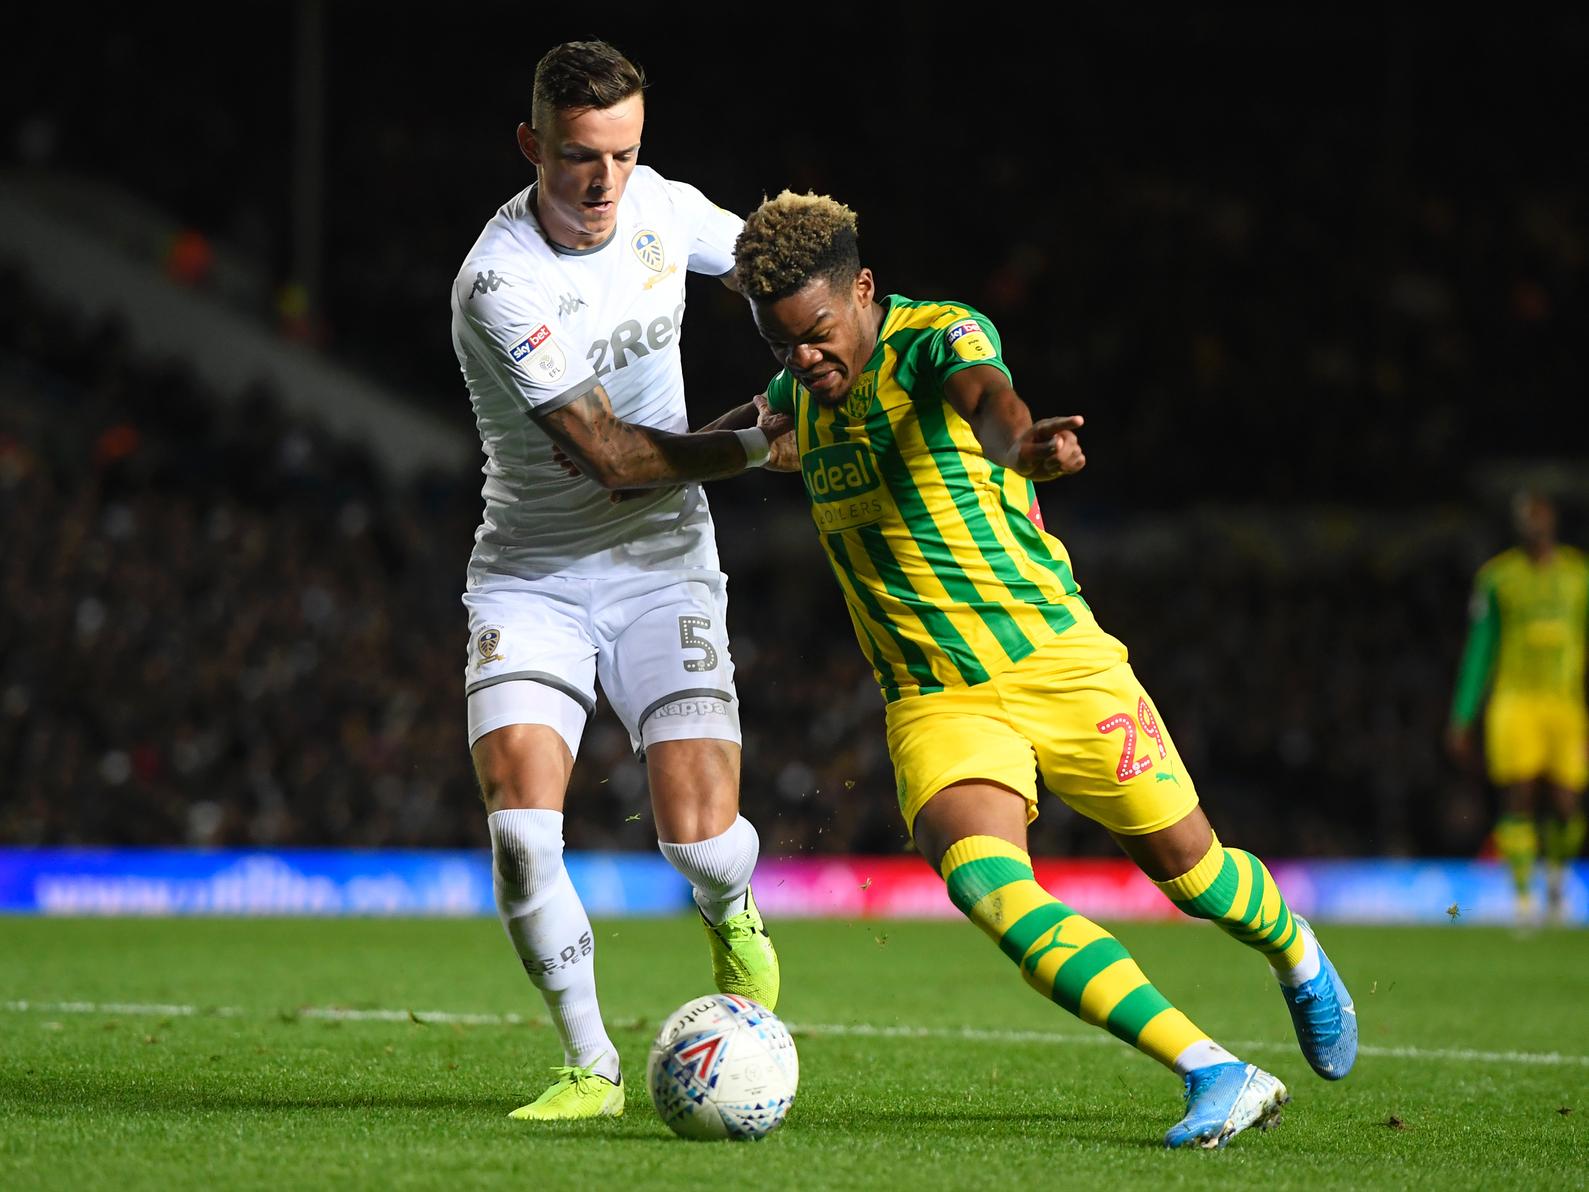 Ex-Leeds star Danny Mills has claimed that the Whites' star loanee defender Ben White will prove to be a real asset for Brighton, and is likely to be sold for a "fortune" in the future. (Football Insider)